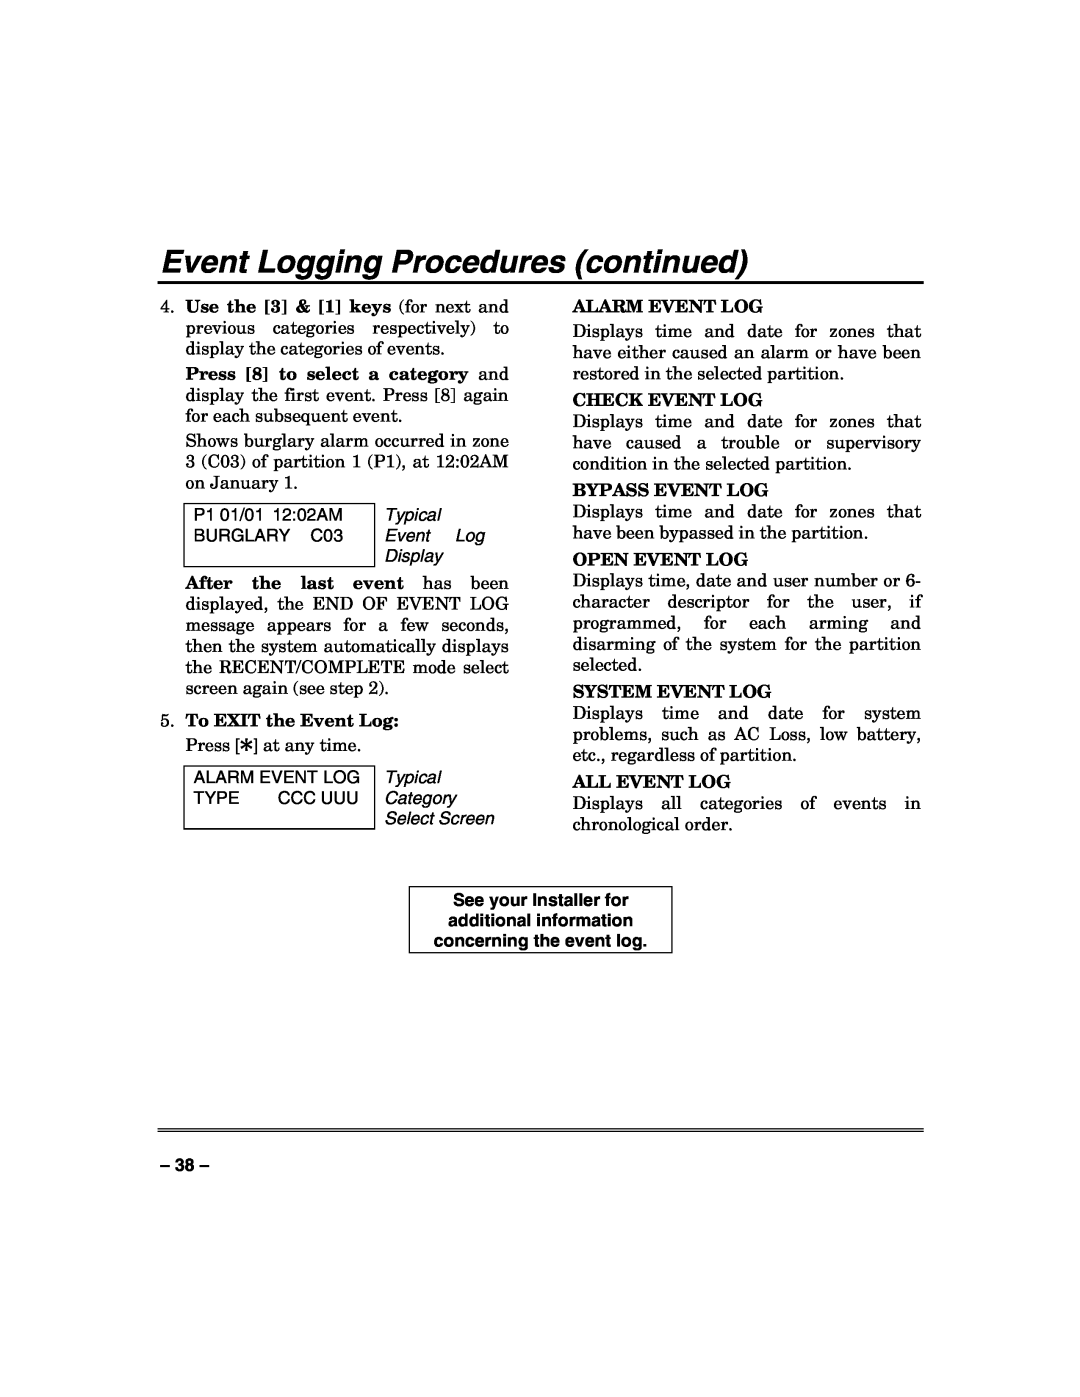 Honeywell N7003V3 manual Event Logging Procedures continued, Typical, Display, To EXIT the Event Log Press 4 at any time 